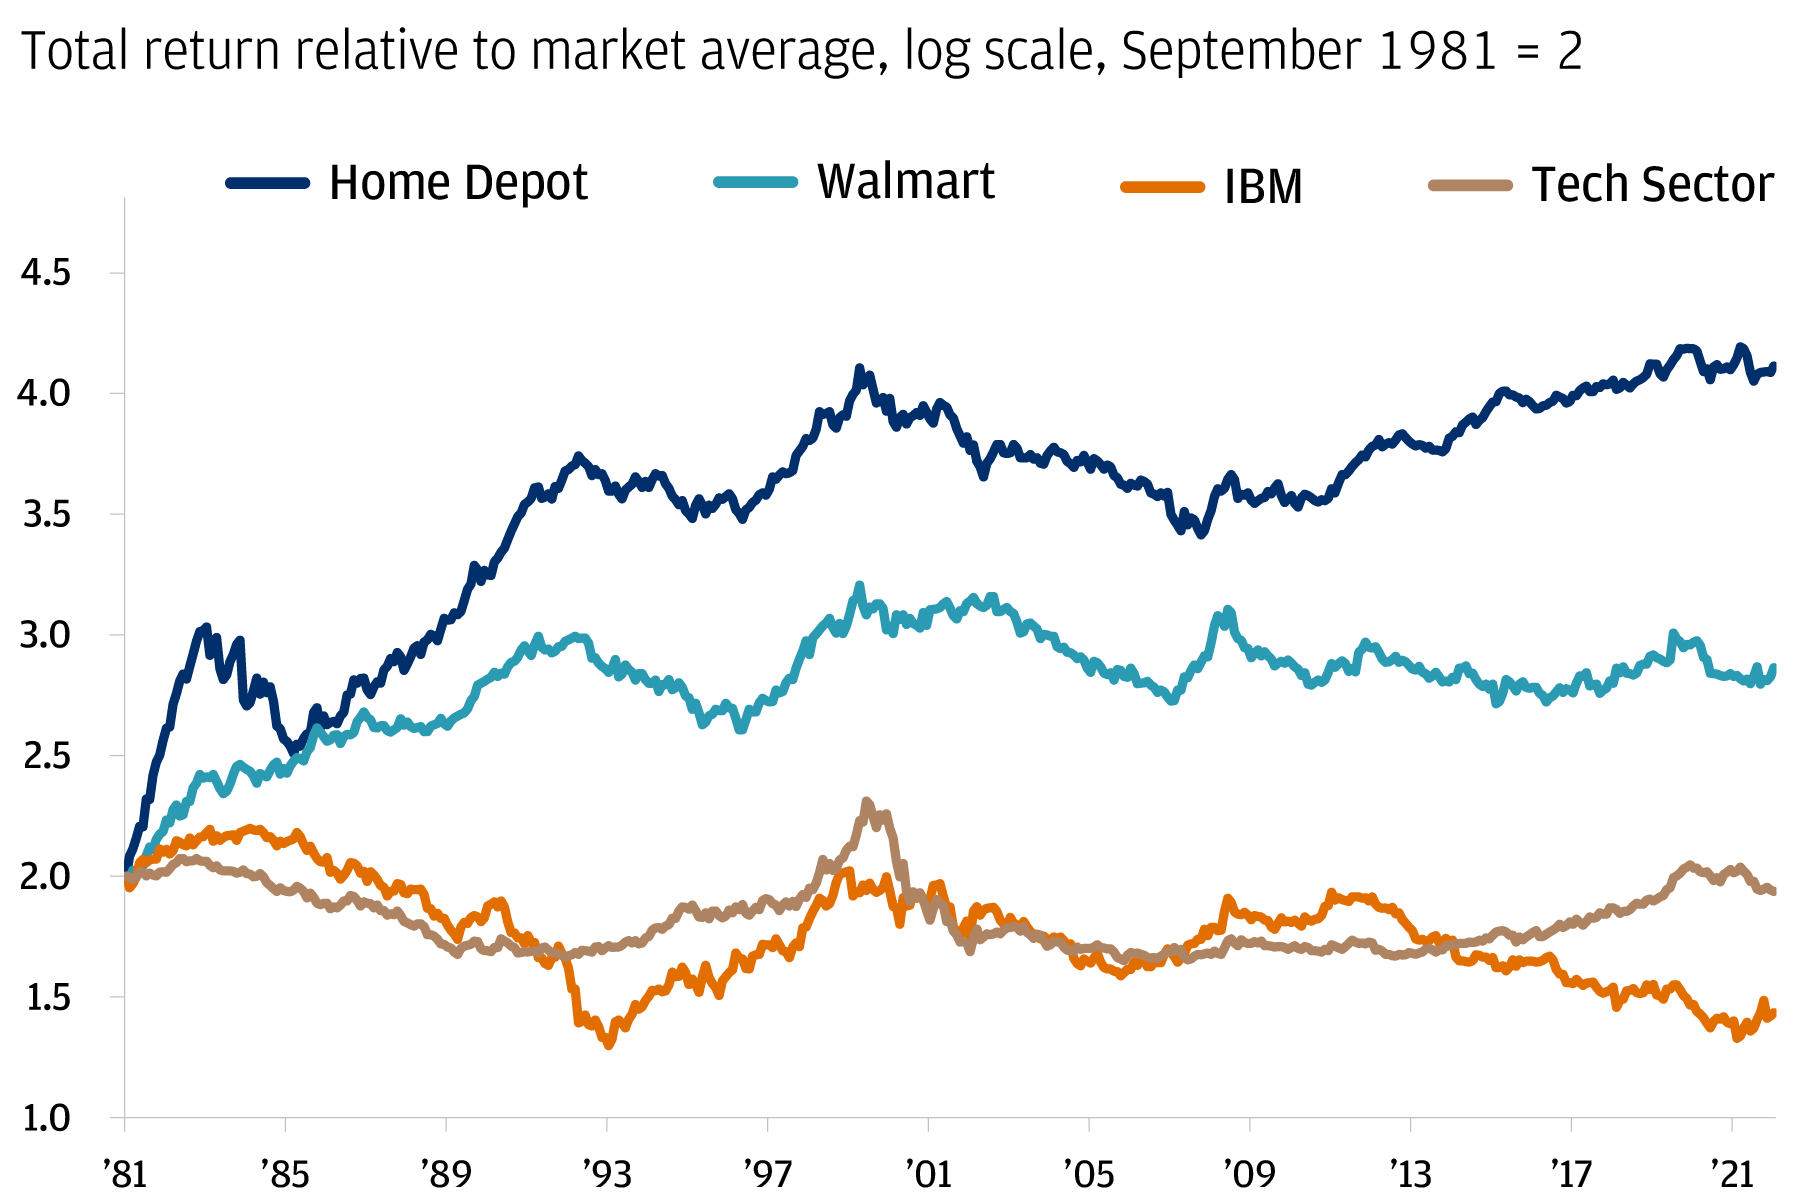 The chart shows the total return of three companies and the tech sector (Home Depot, Walmart, IBM, and Tech Sector) relative to market average since 1981, indexed at 2 for September 1981. 